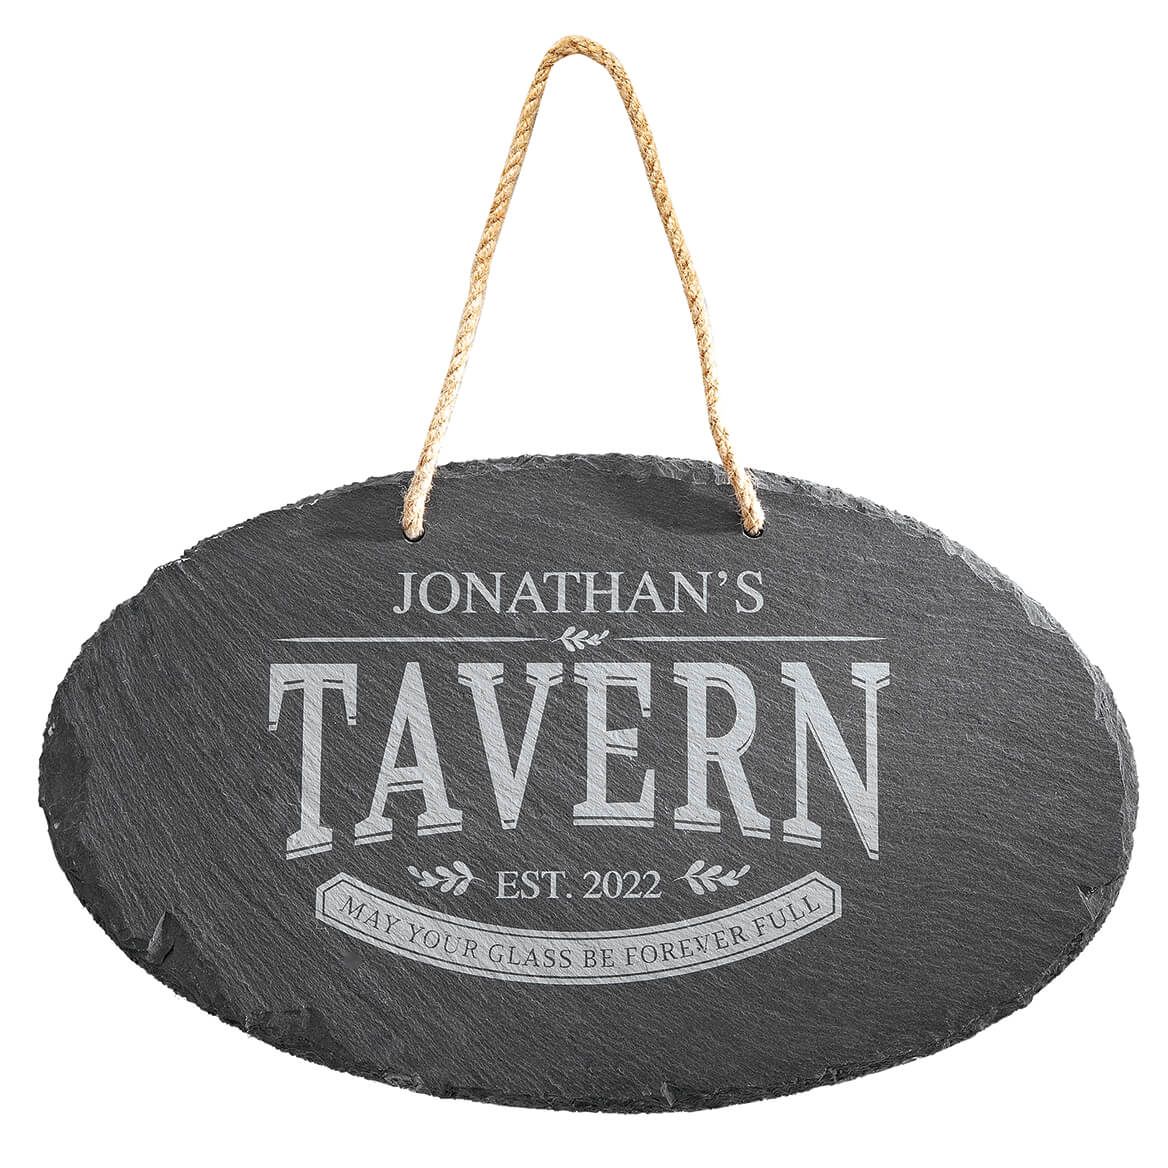 Personalized Tavern Slate Plaque + '-' + 374209